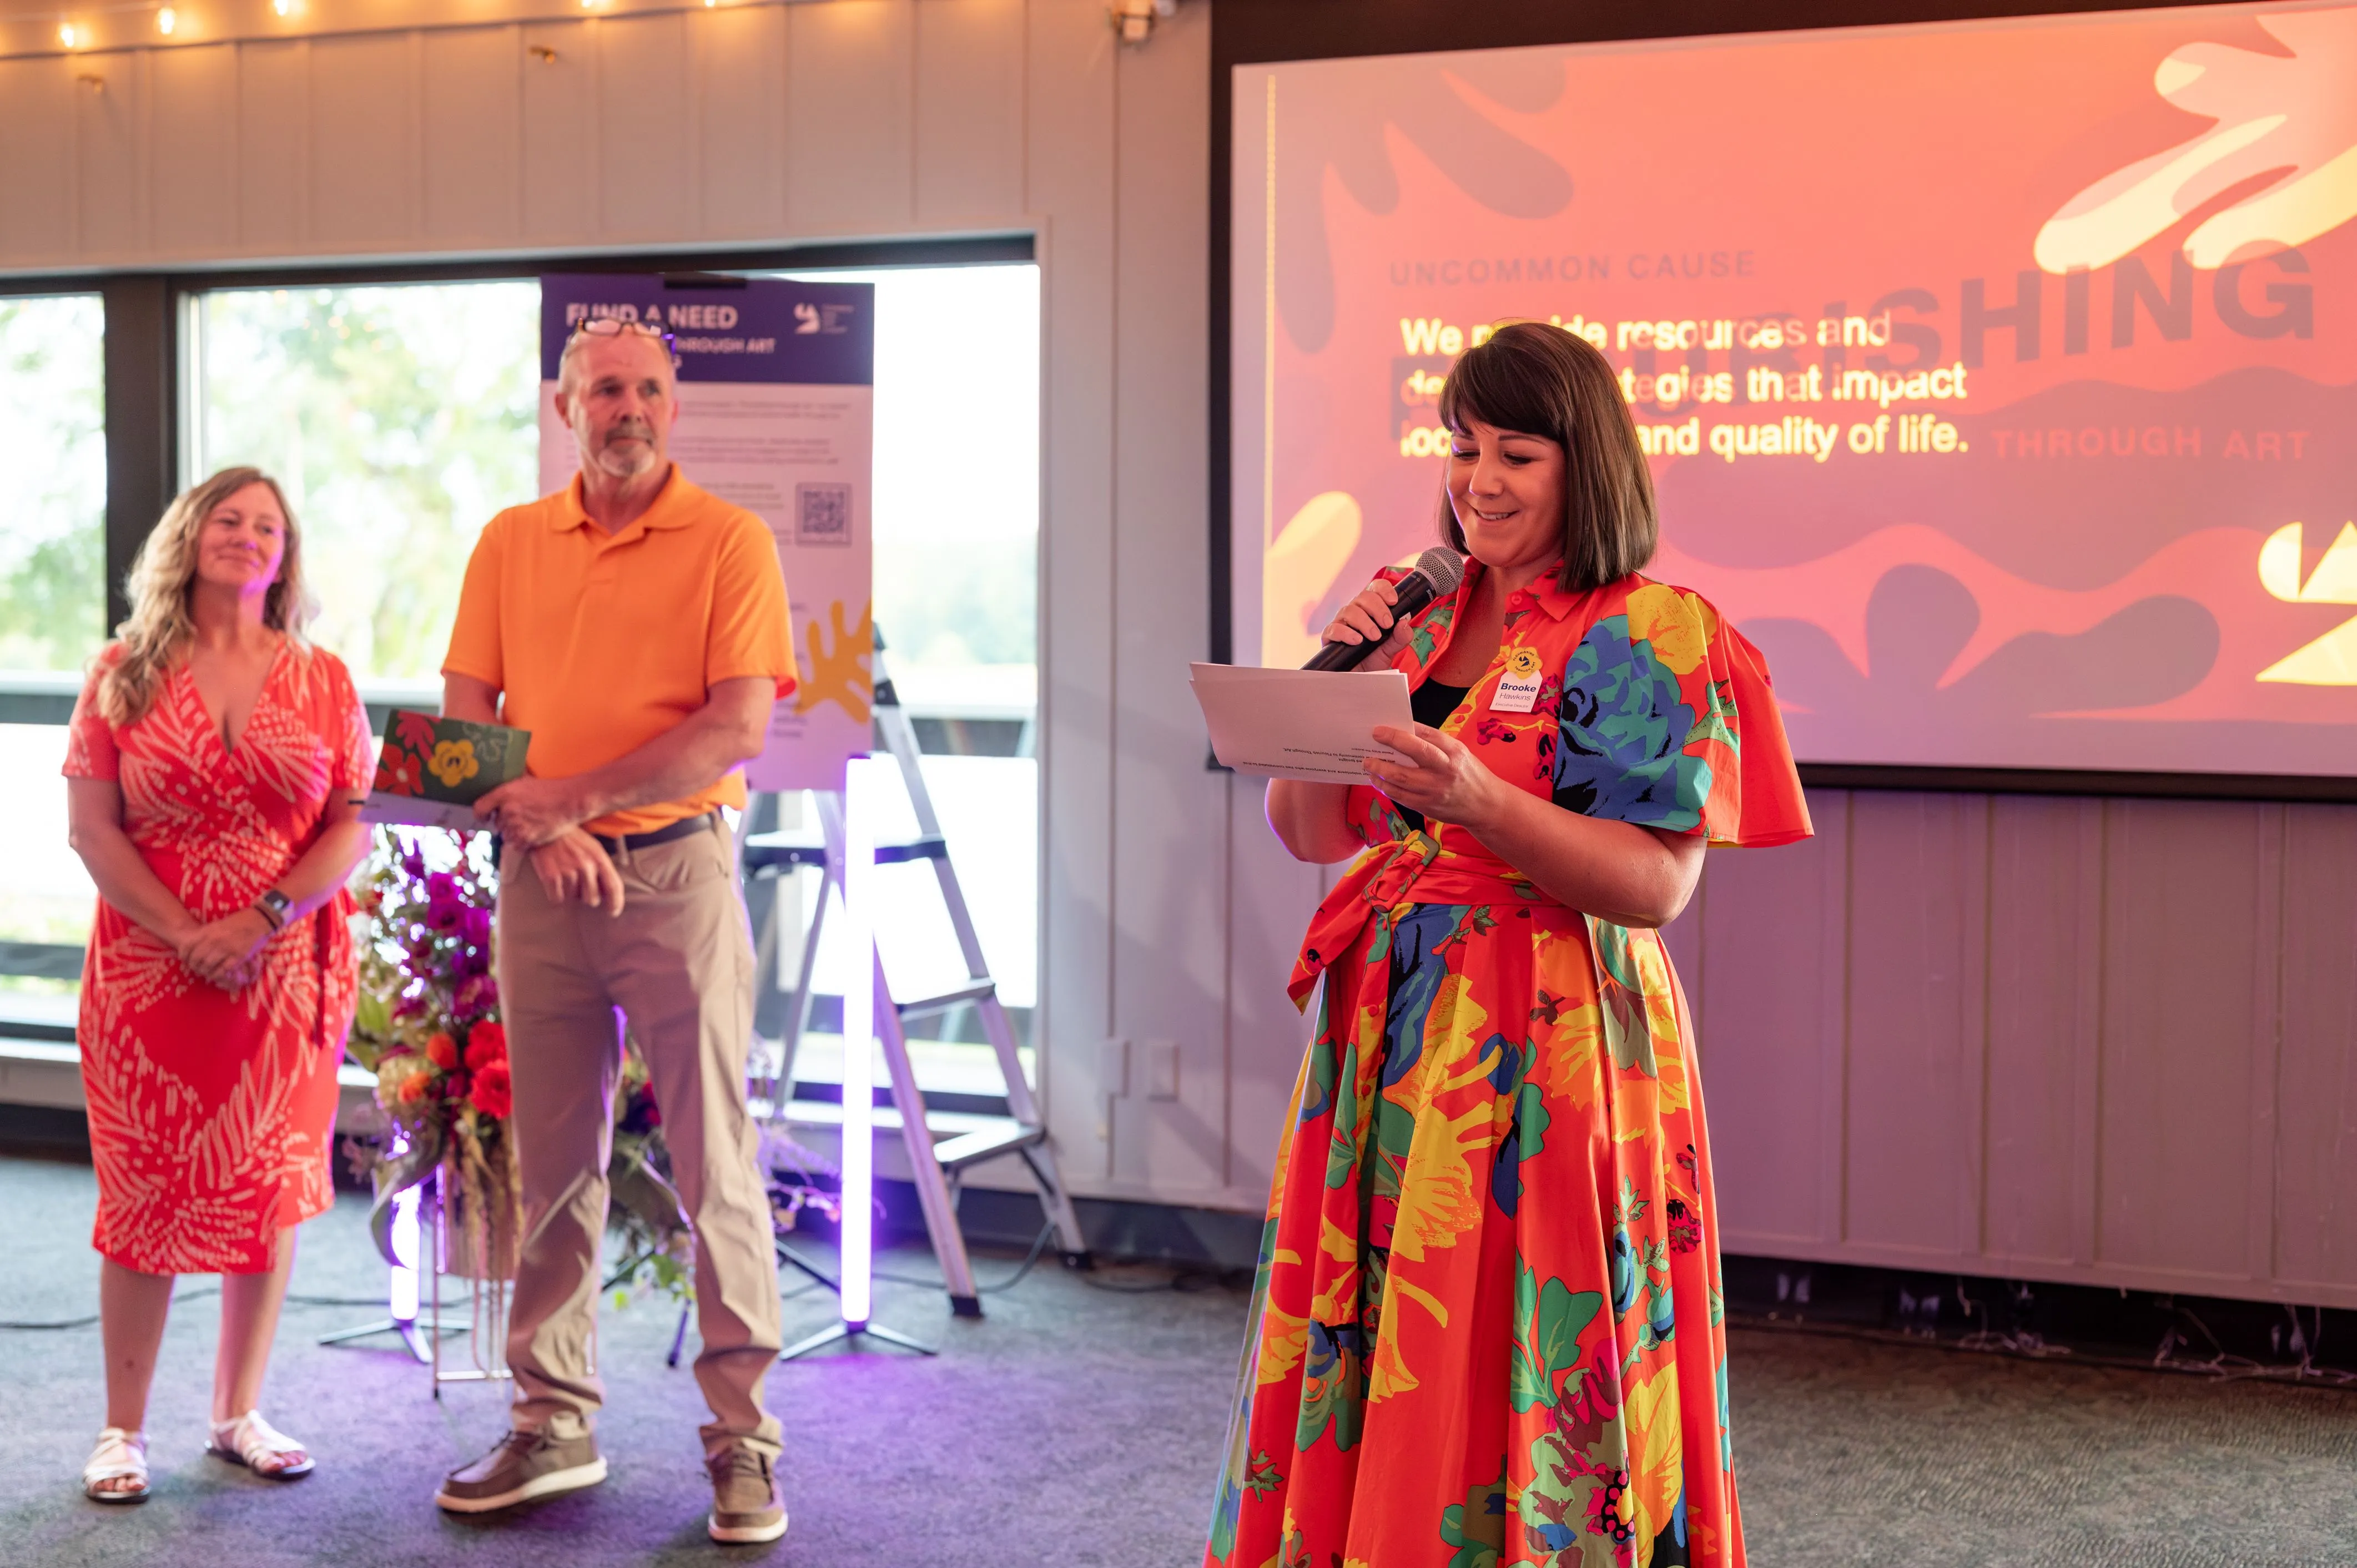 A woman in a colorful dress speaking into a microphone at an event with two other individuals behind her, one carrying flowers, against a backdrop with a projected image.